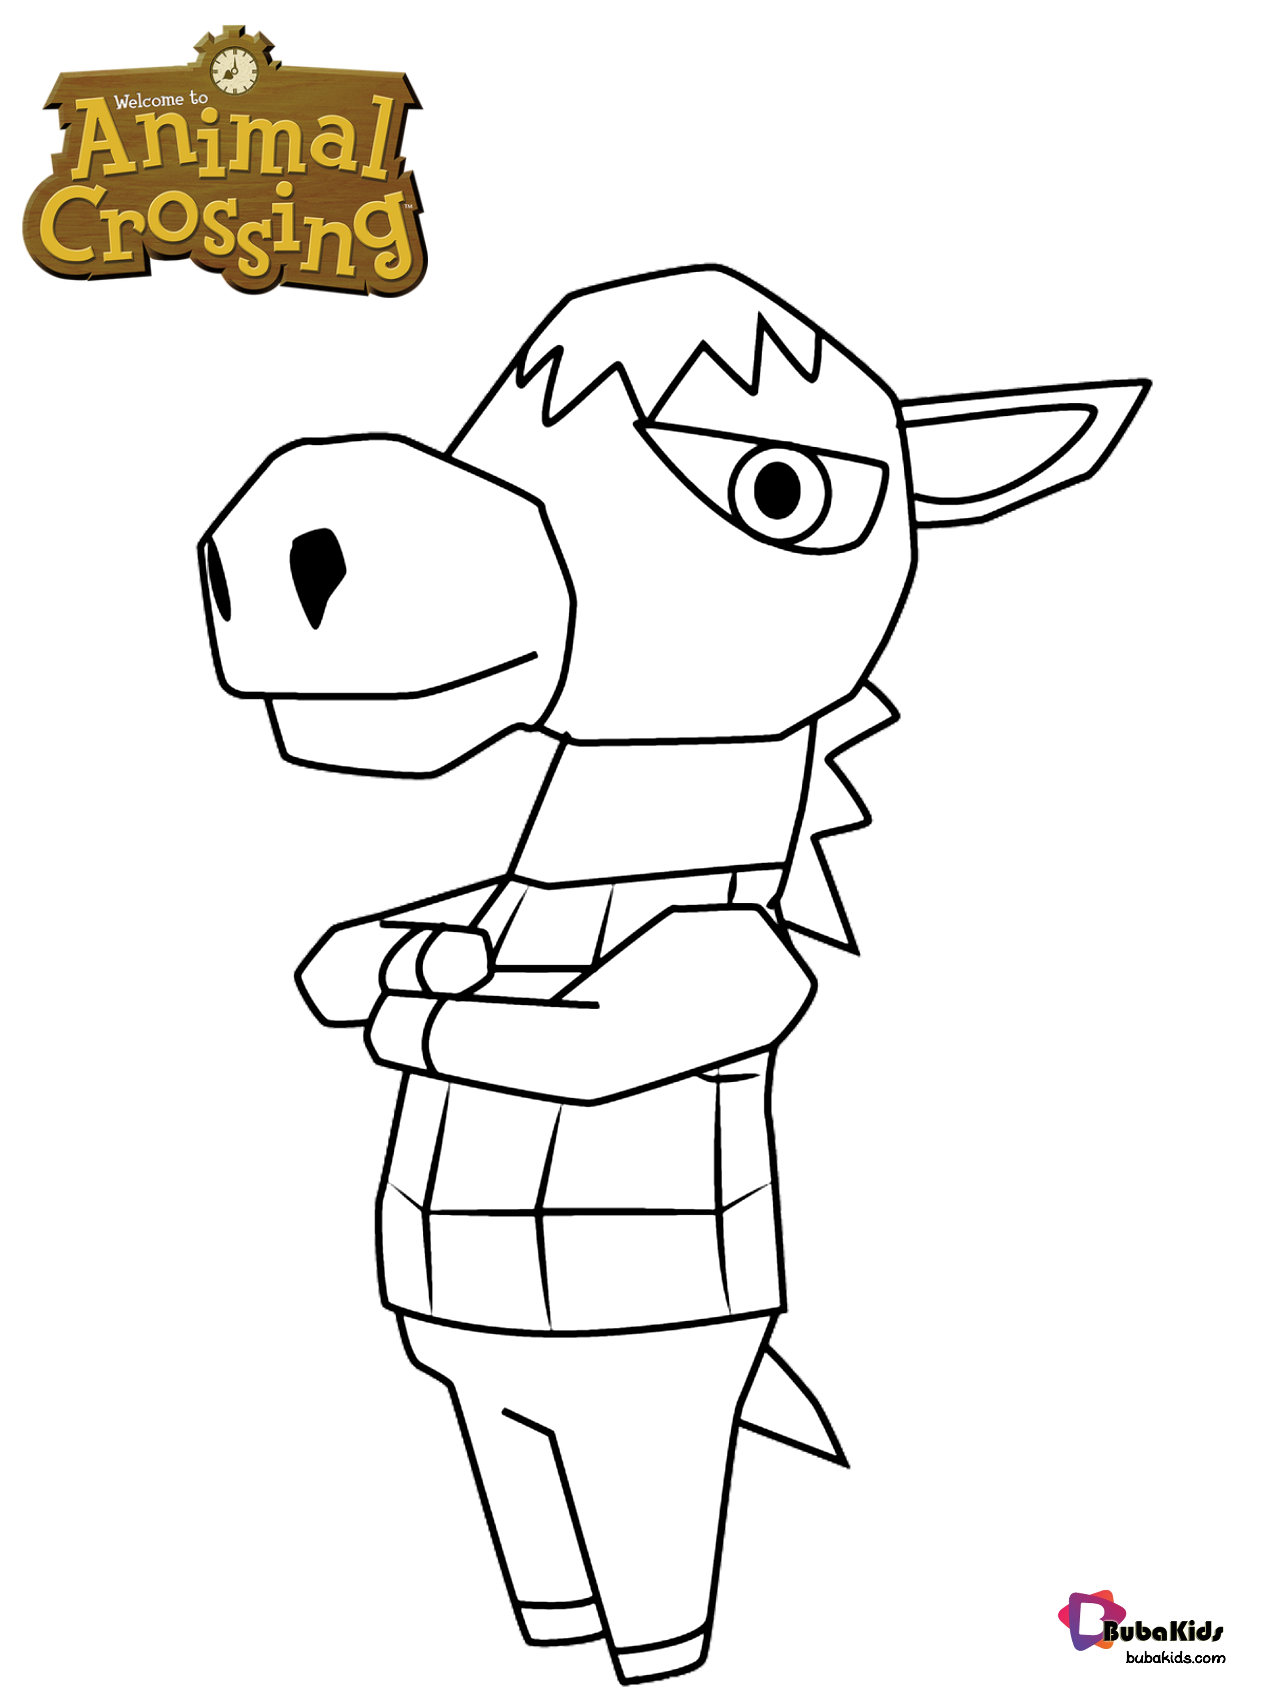 Roscoe Animal Crossing character coloring pages